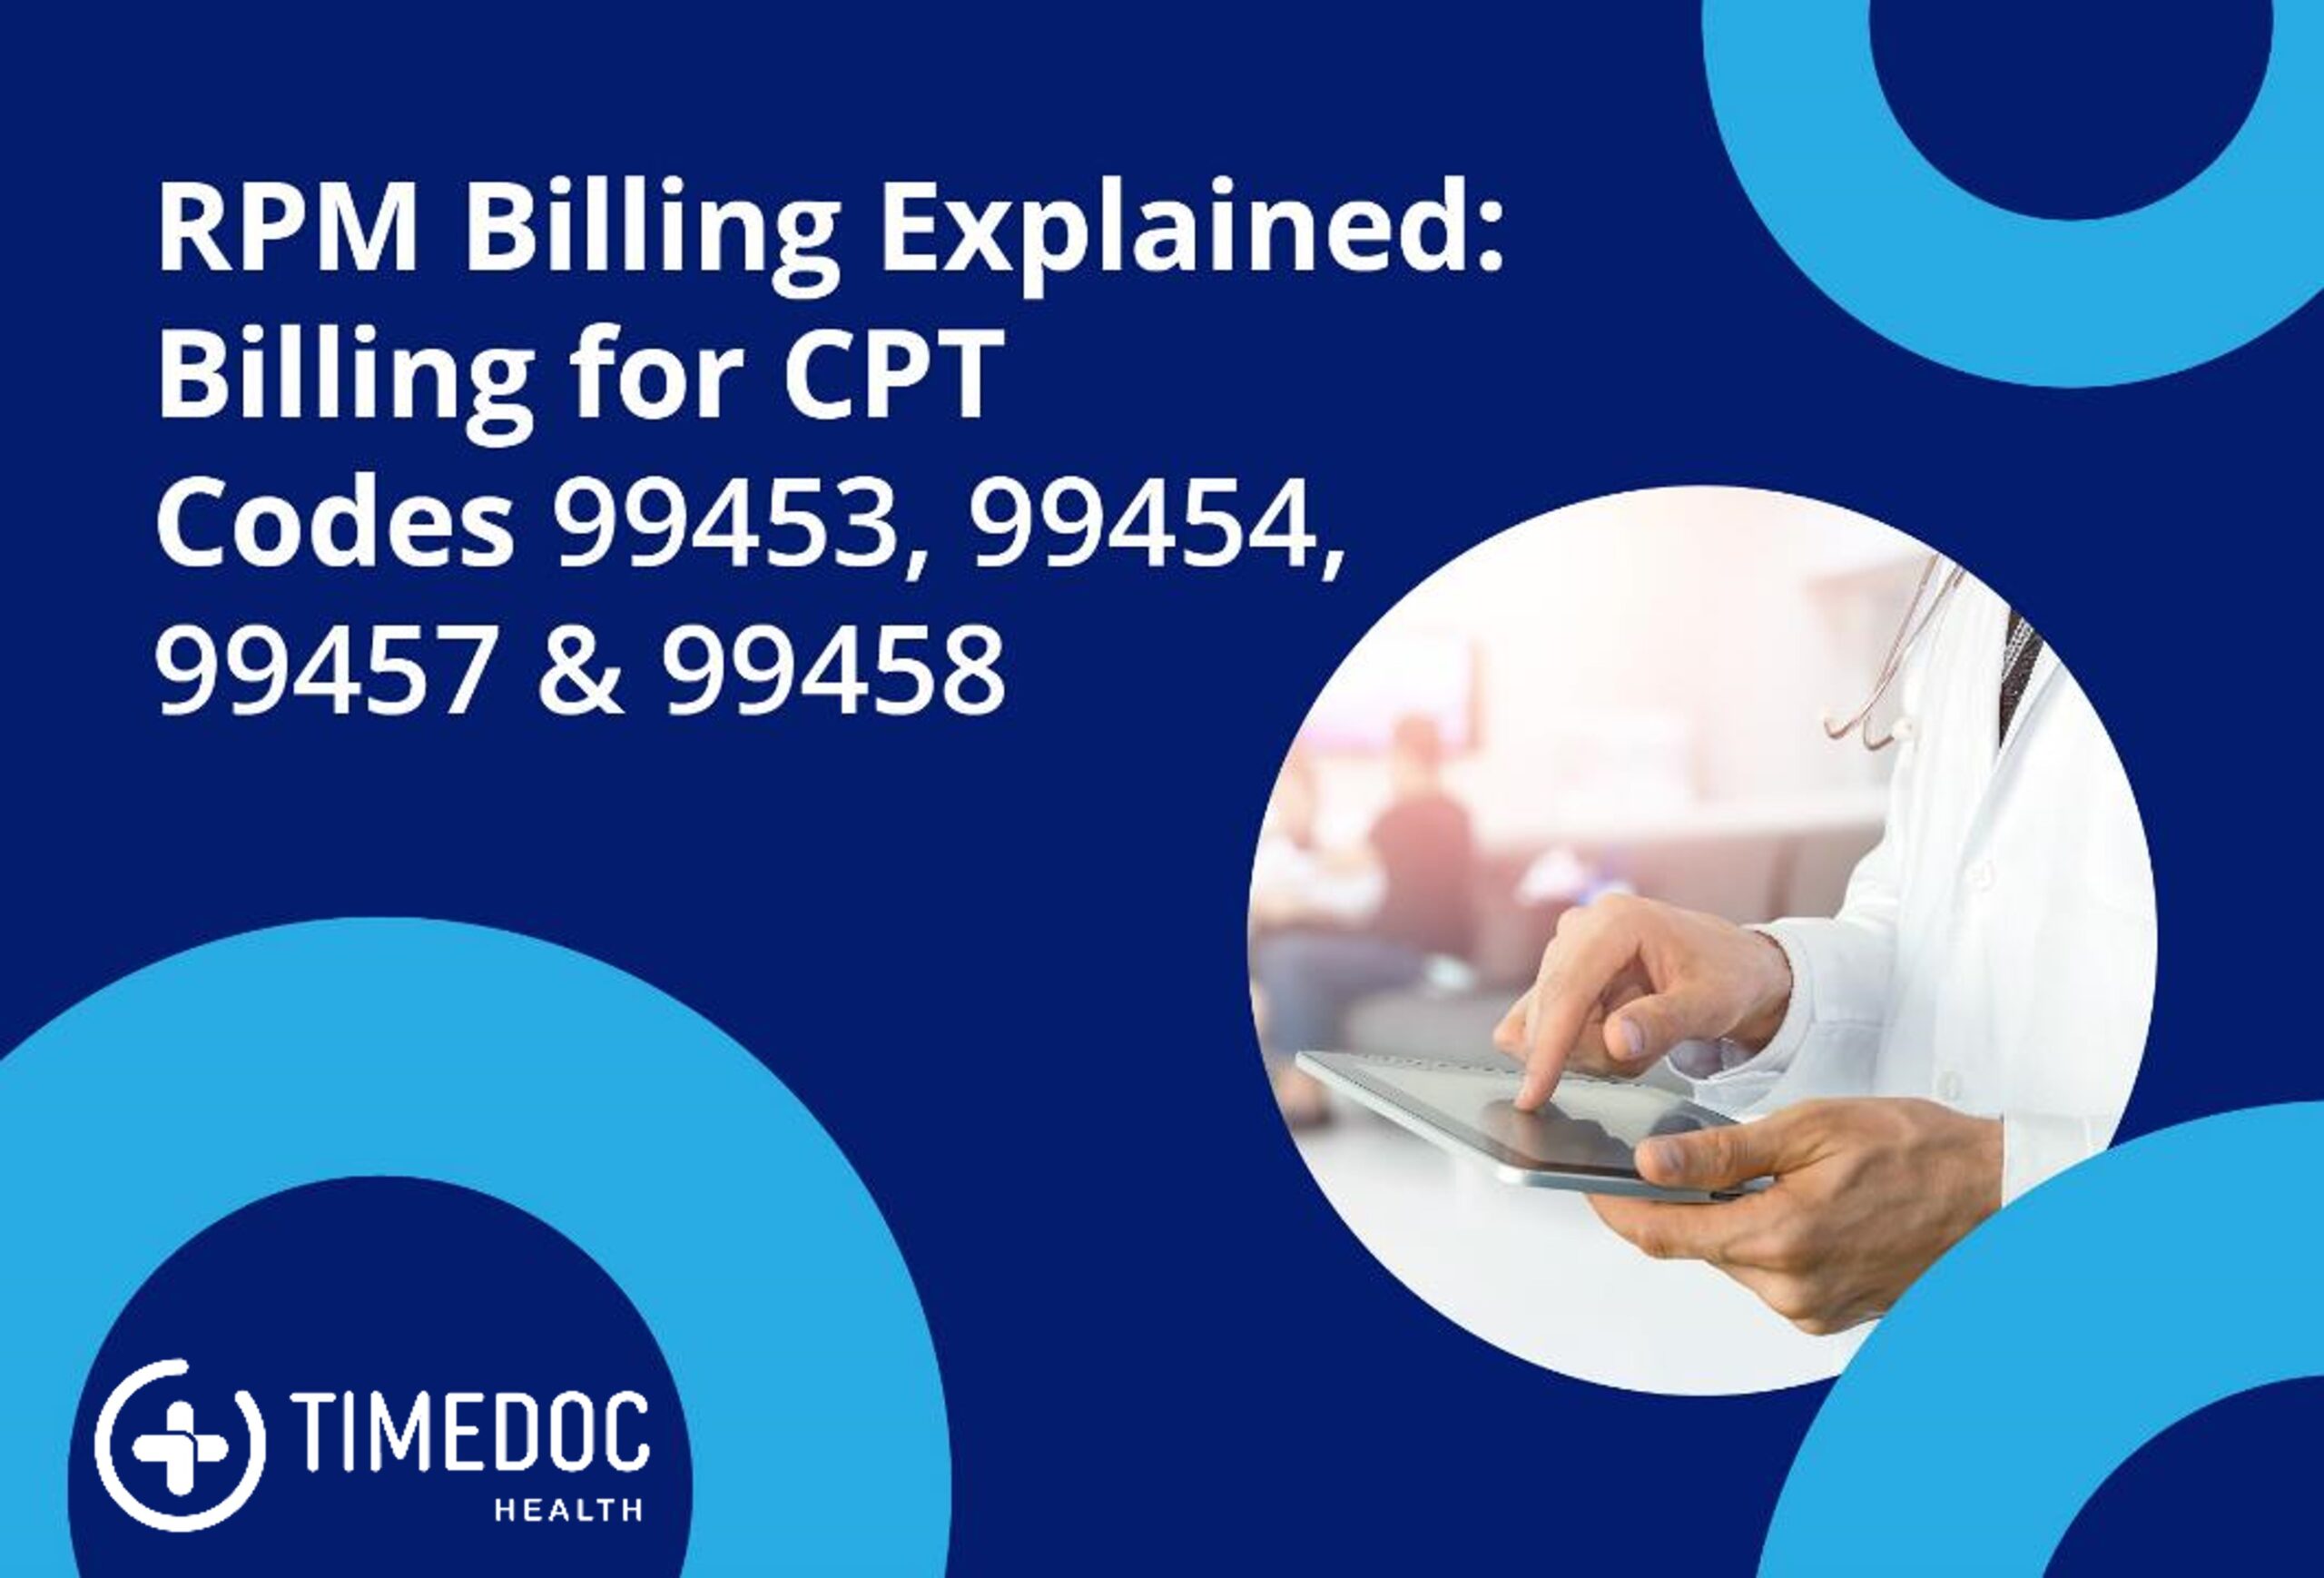 RPM Billing Explained Billing for CPT Codes 99453, 99454, 99457